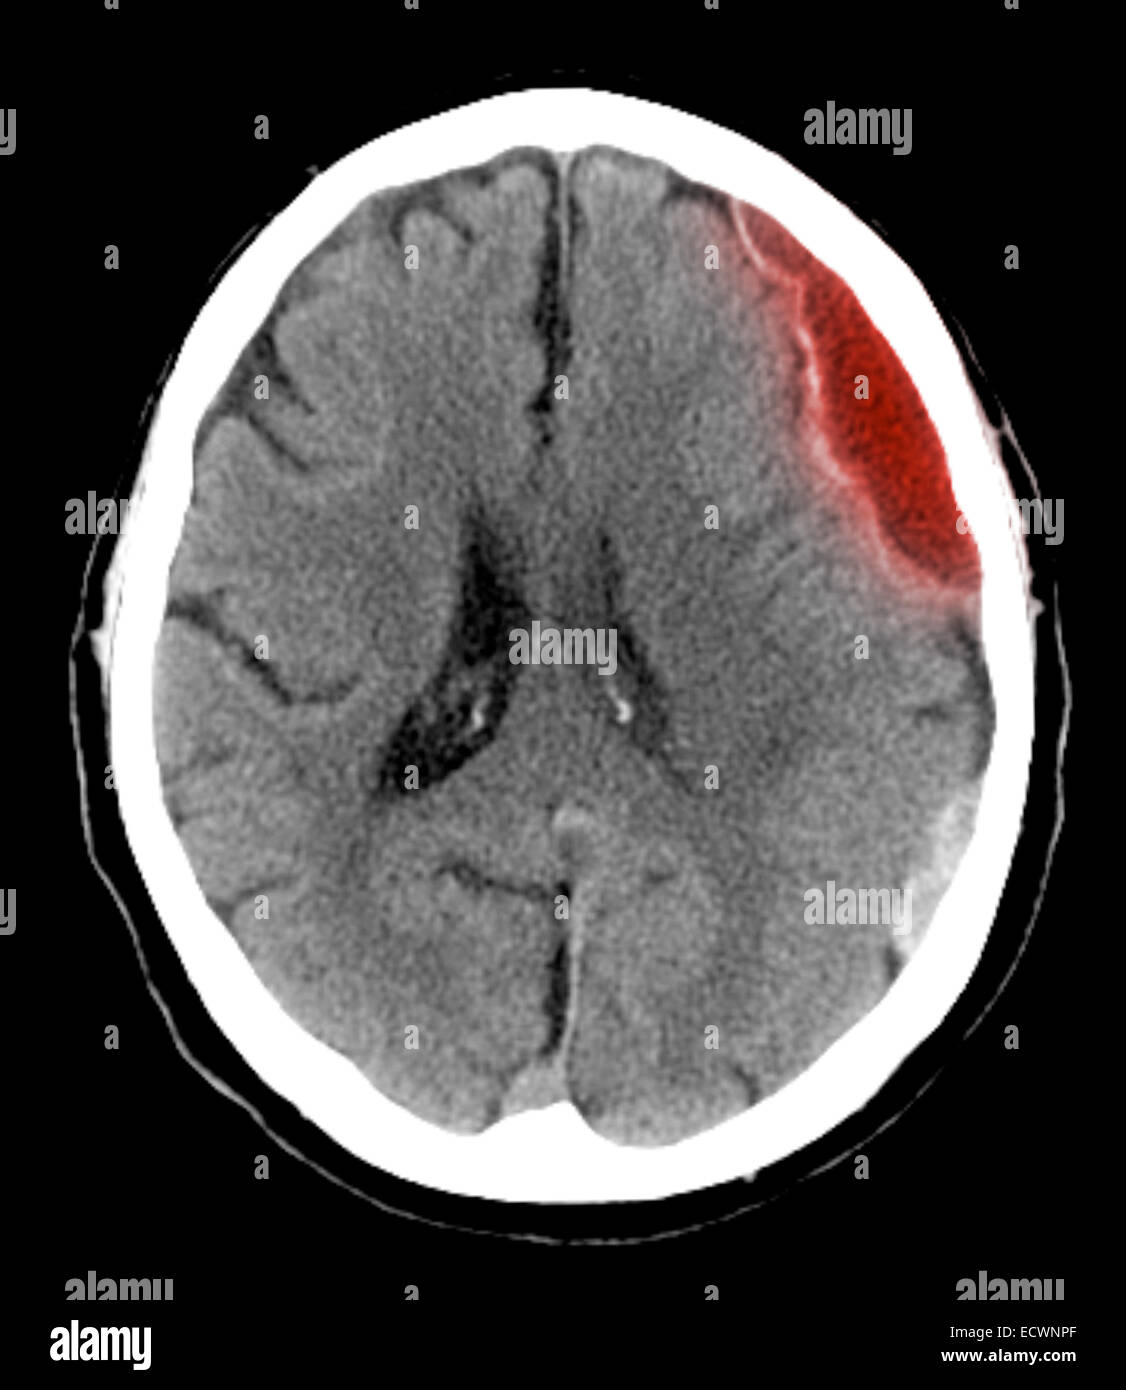 Ct Scan Of The Head Showing A Subdural Hematoma Stock Photo | Sexiz Pix